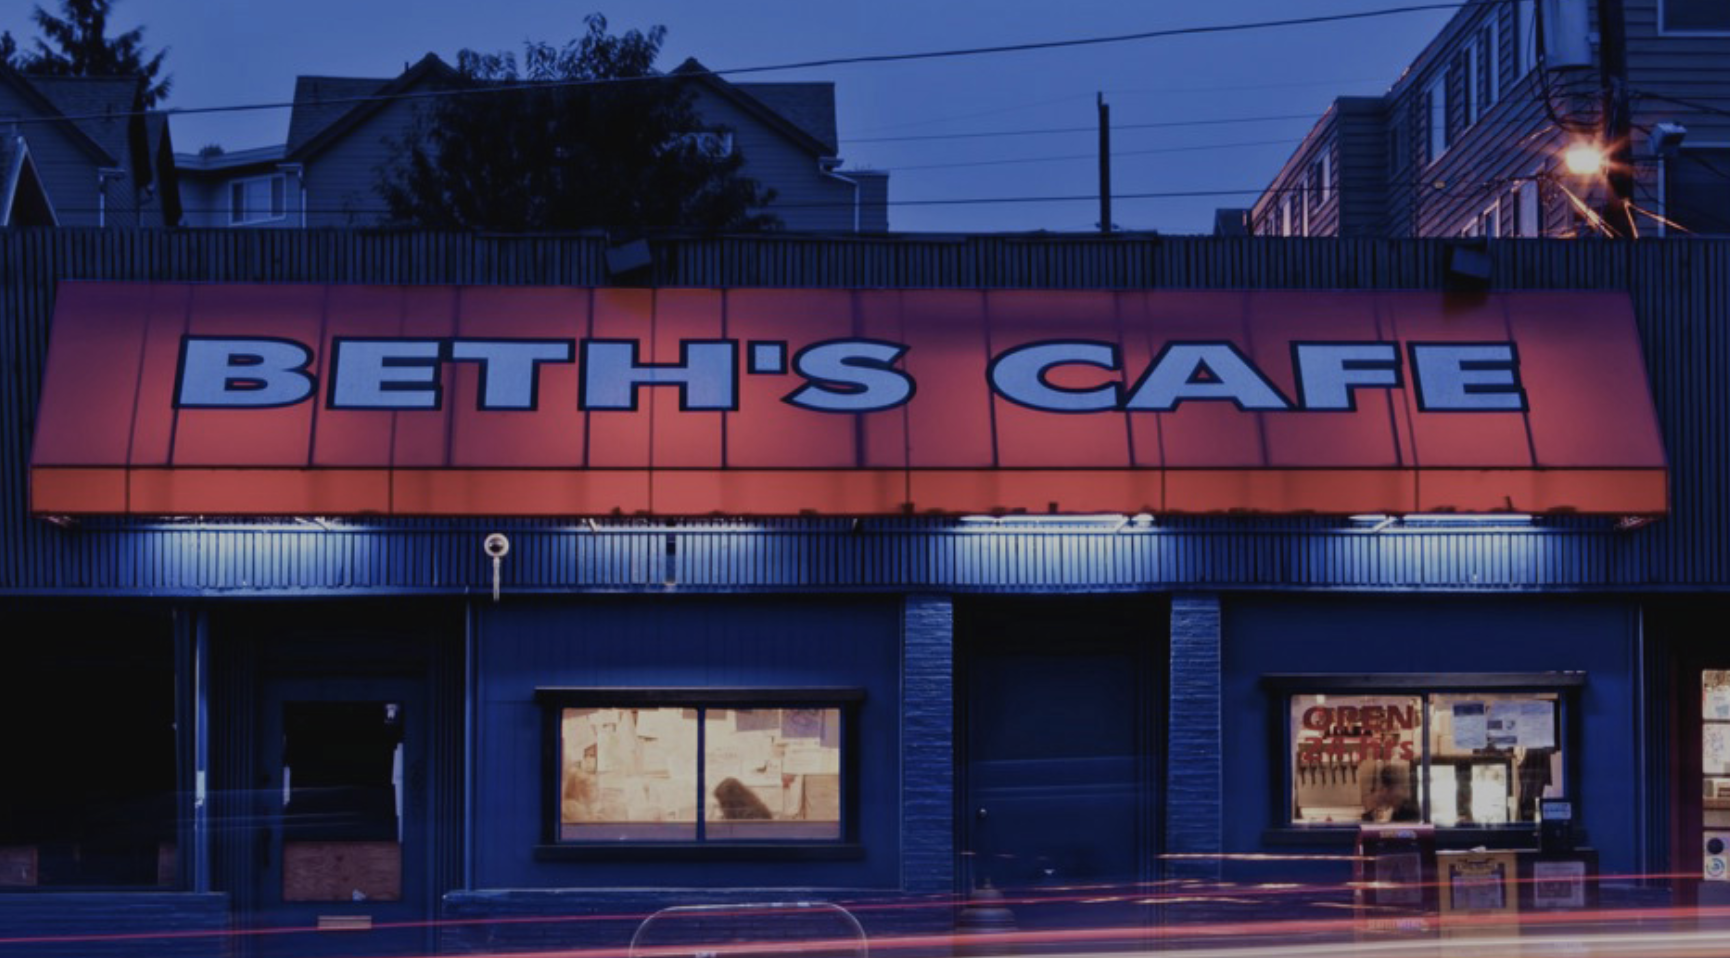 The front of Beth’s Cafe with its red awning backlit at dusk